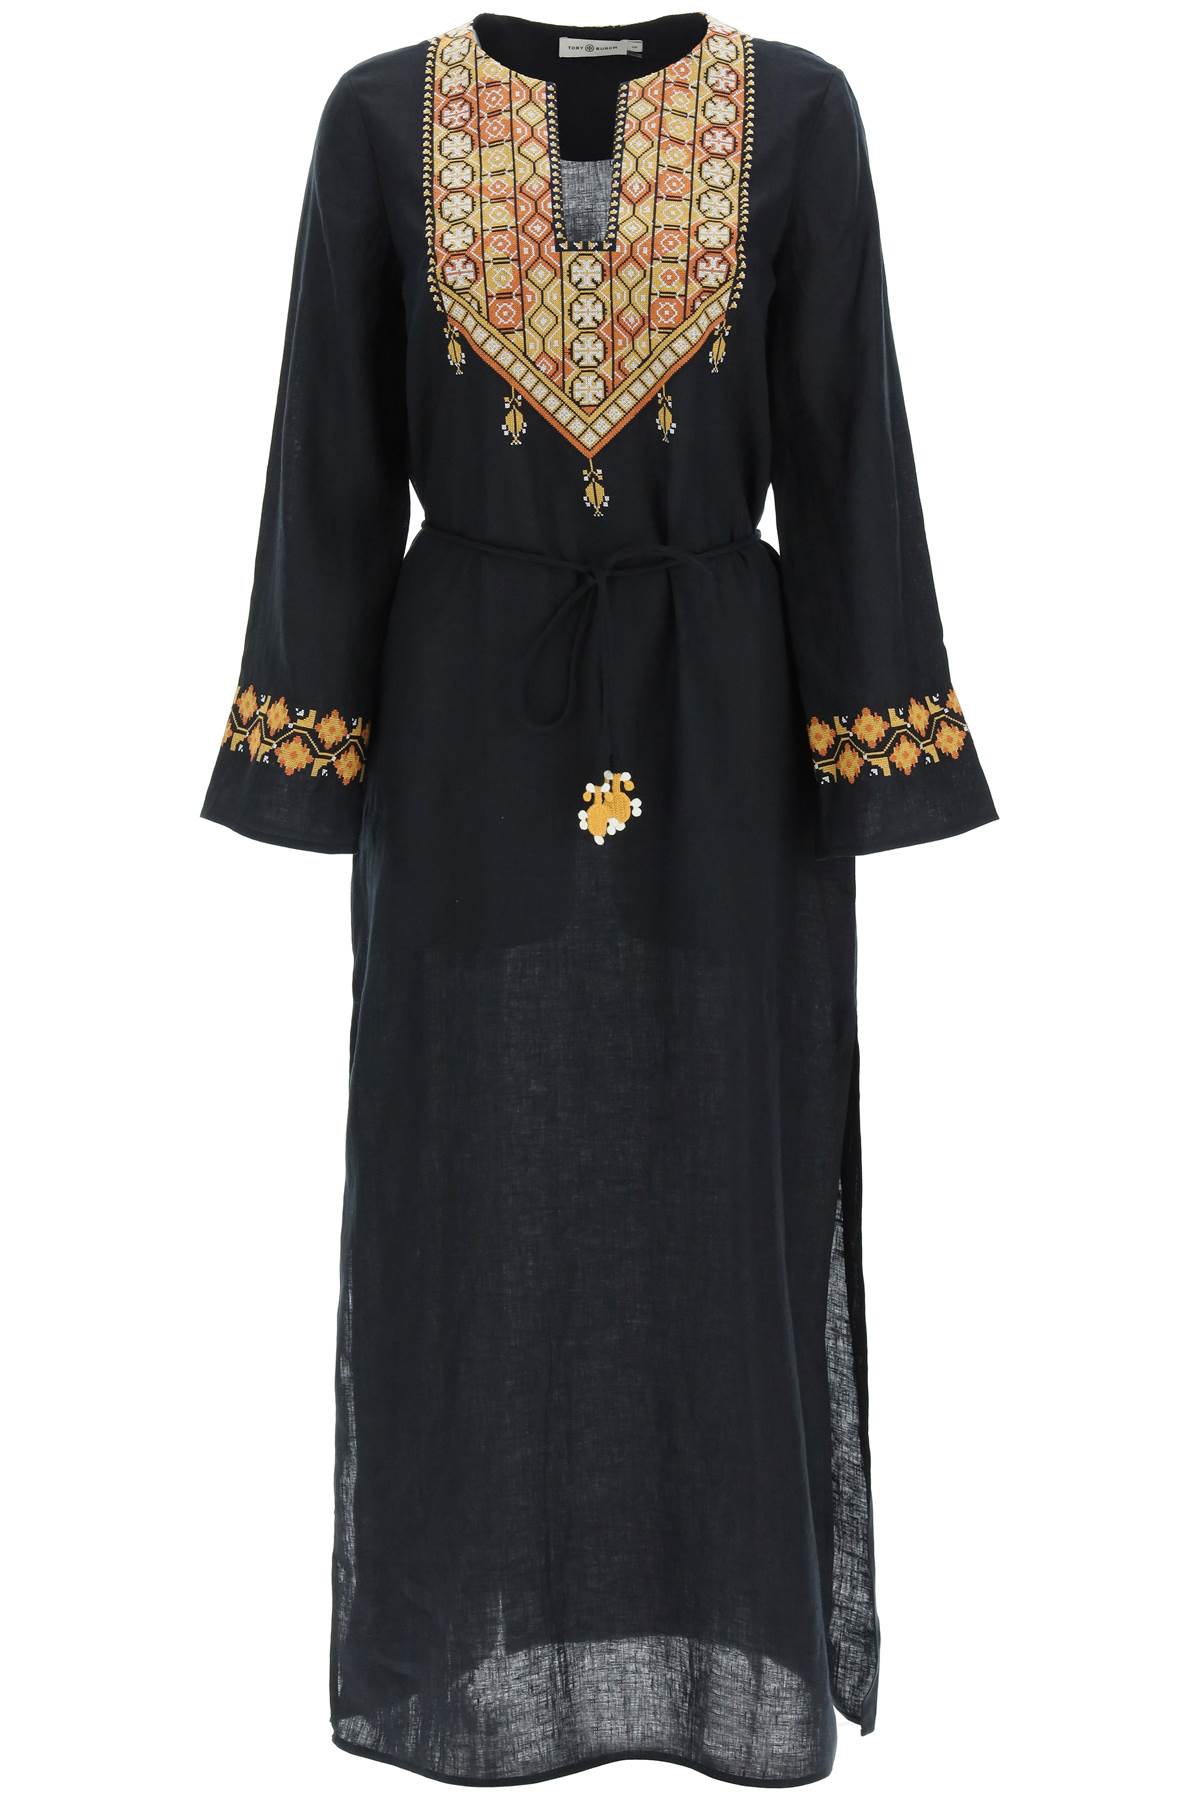 Tory Burch Embroidered Linen Caftan